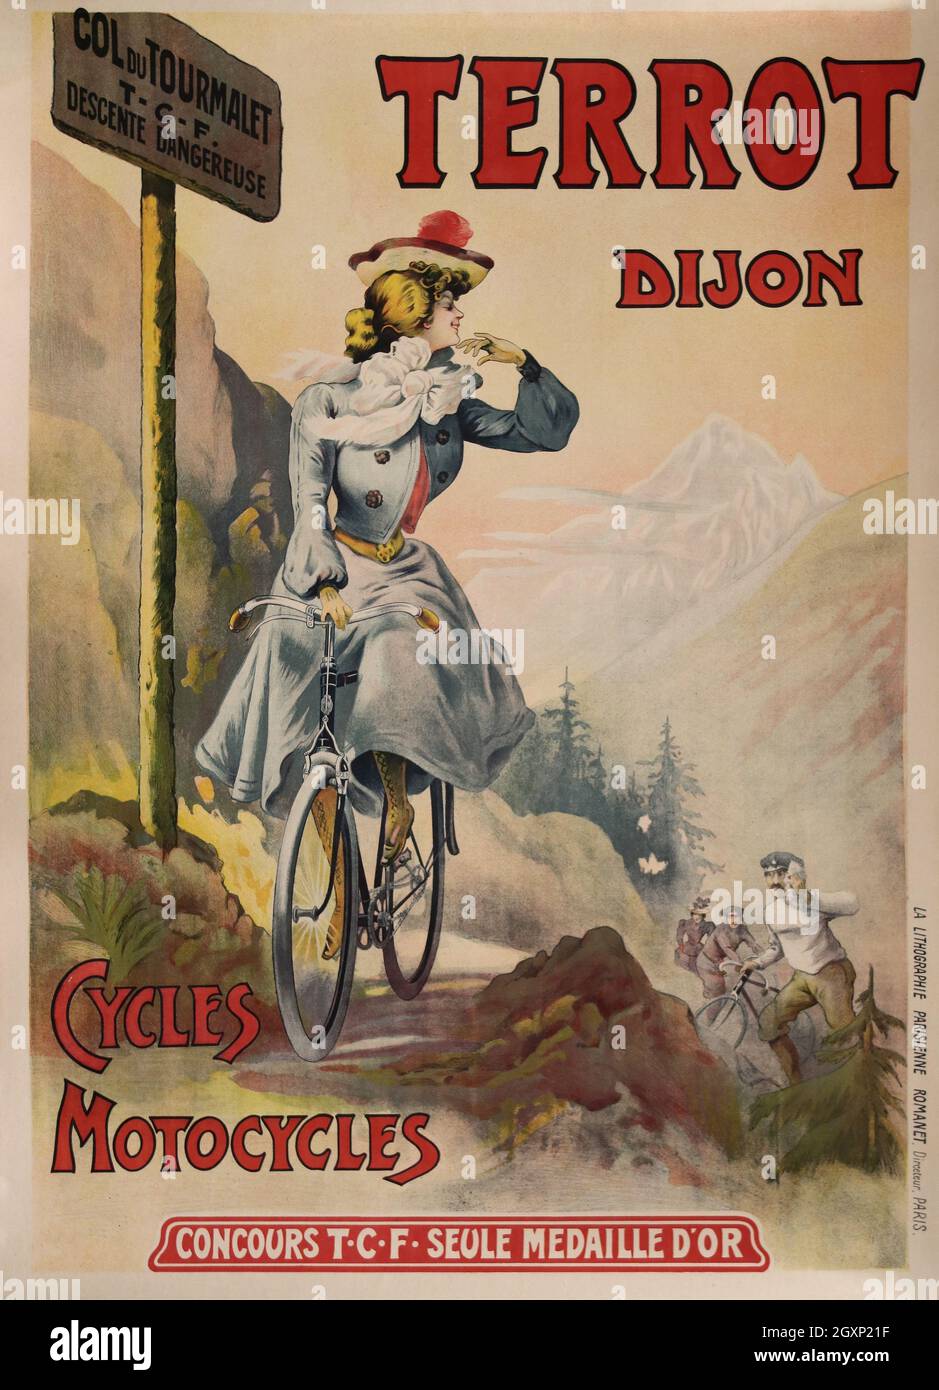 Terrot Dijon cycles Motocycles Banque D'Images